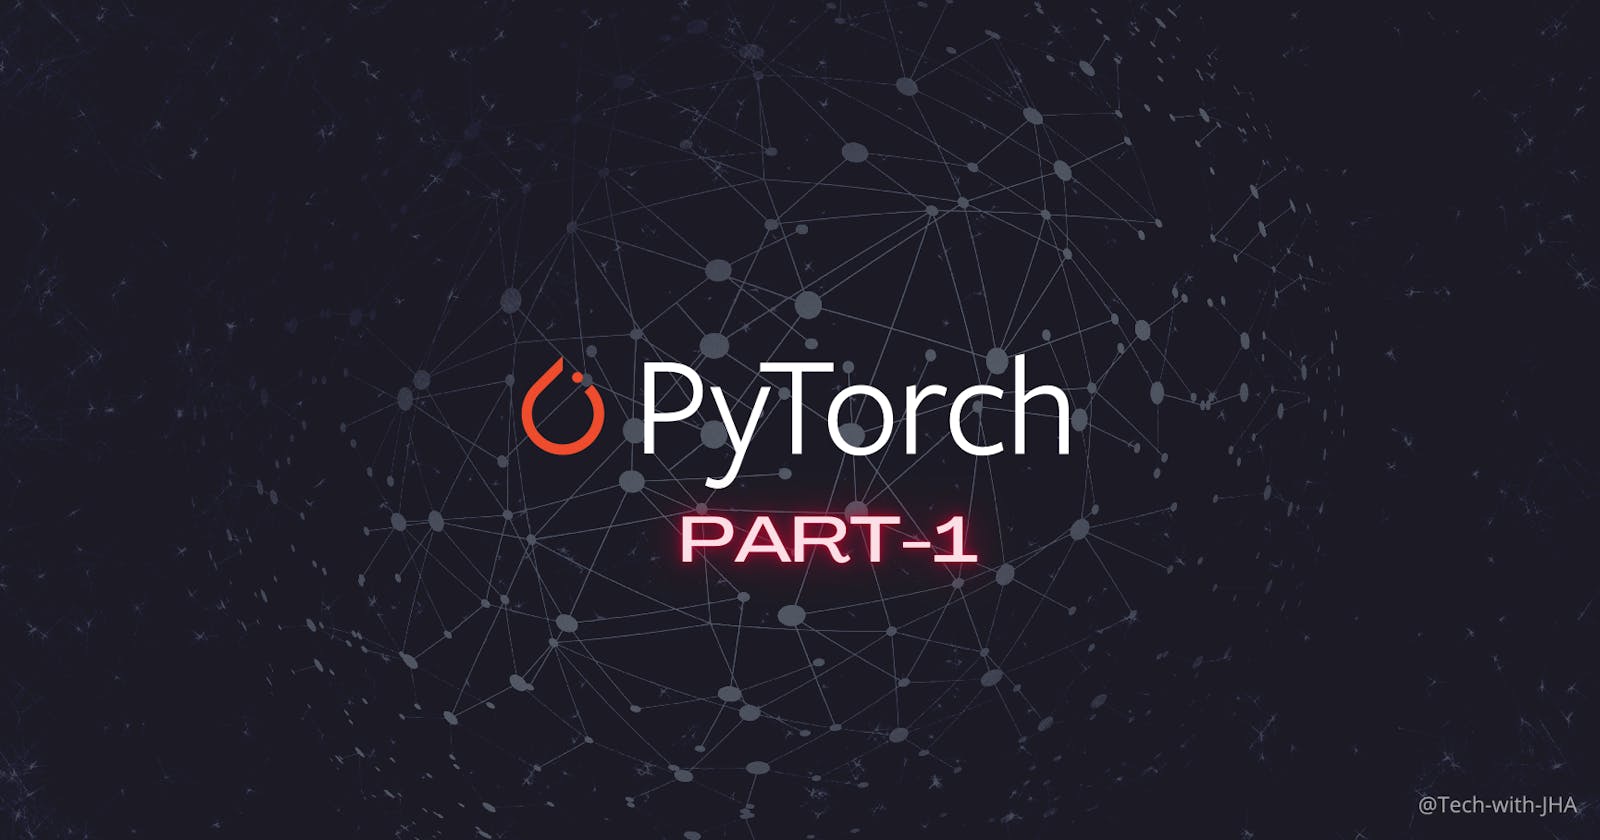 Getting started on DeepLearning with "PyTorch" - PART 1